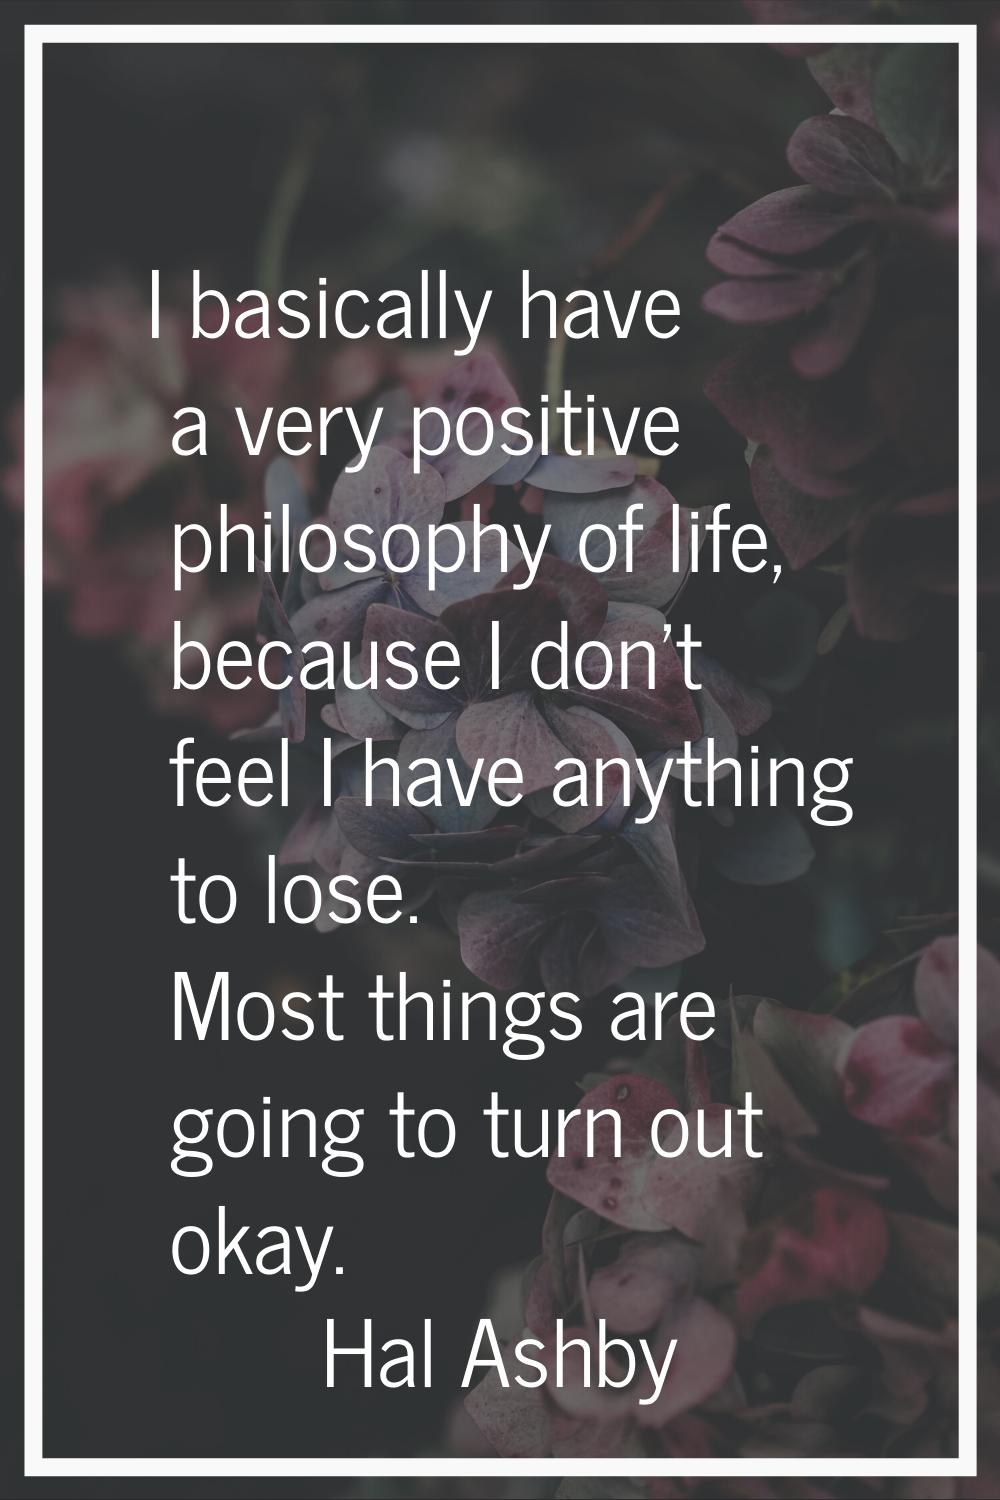 I basically have a very positive philosophy of life, because I don't feel I have anything to lose. 